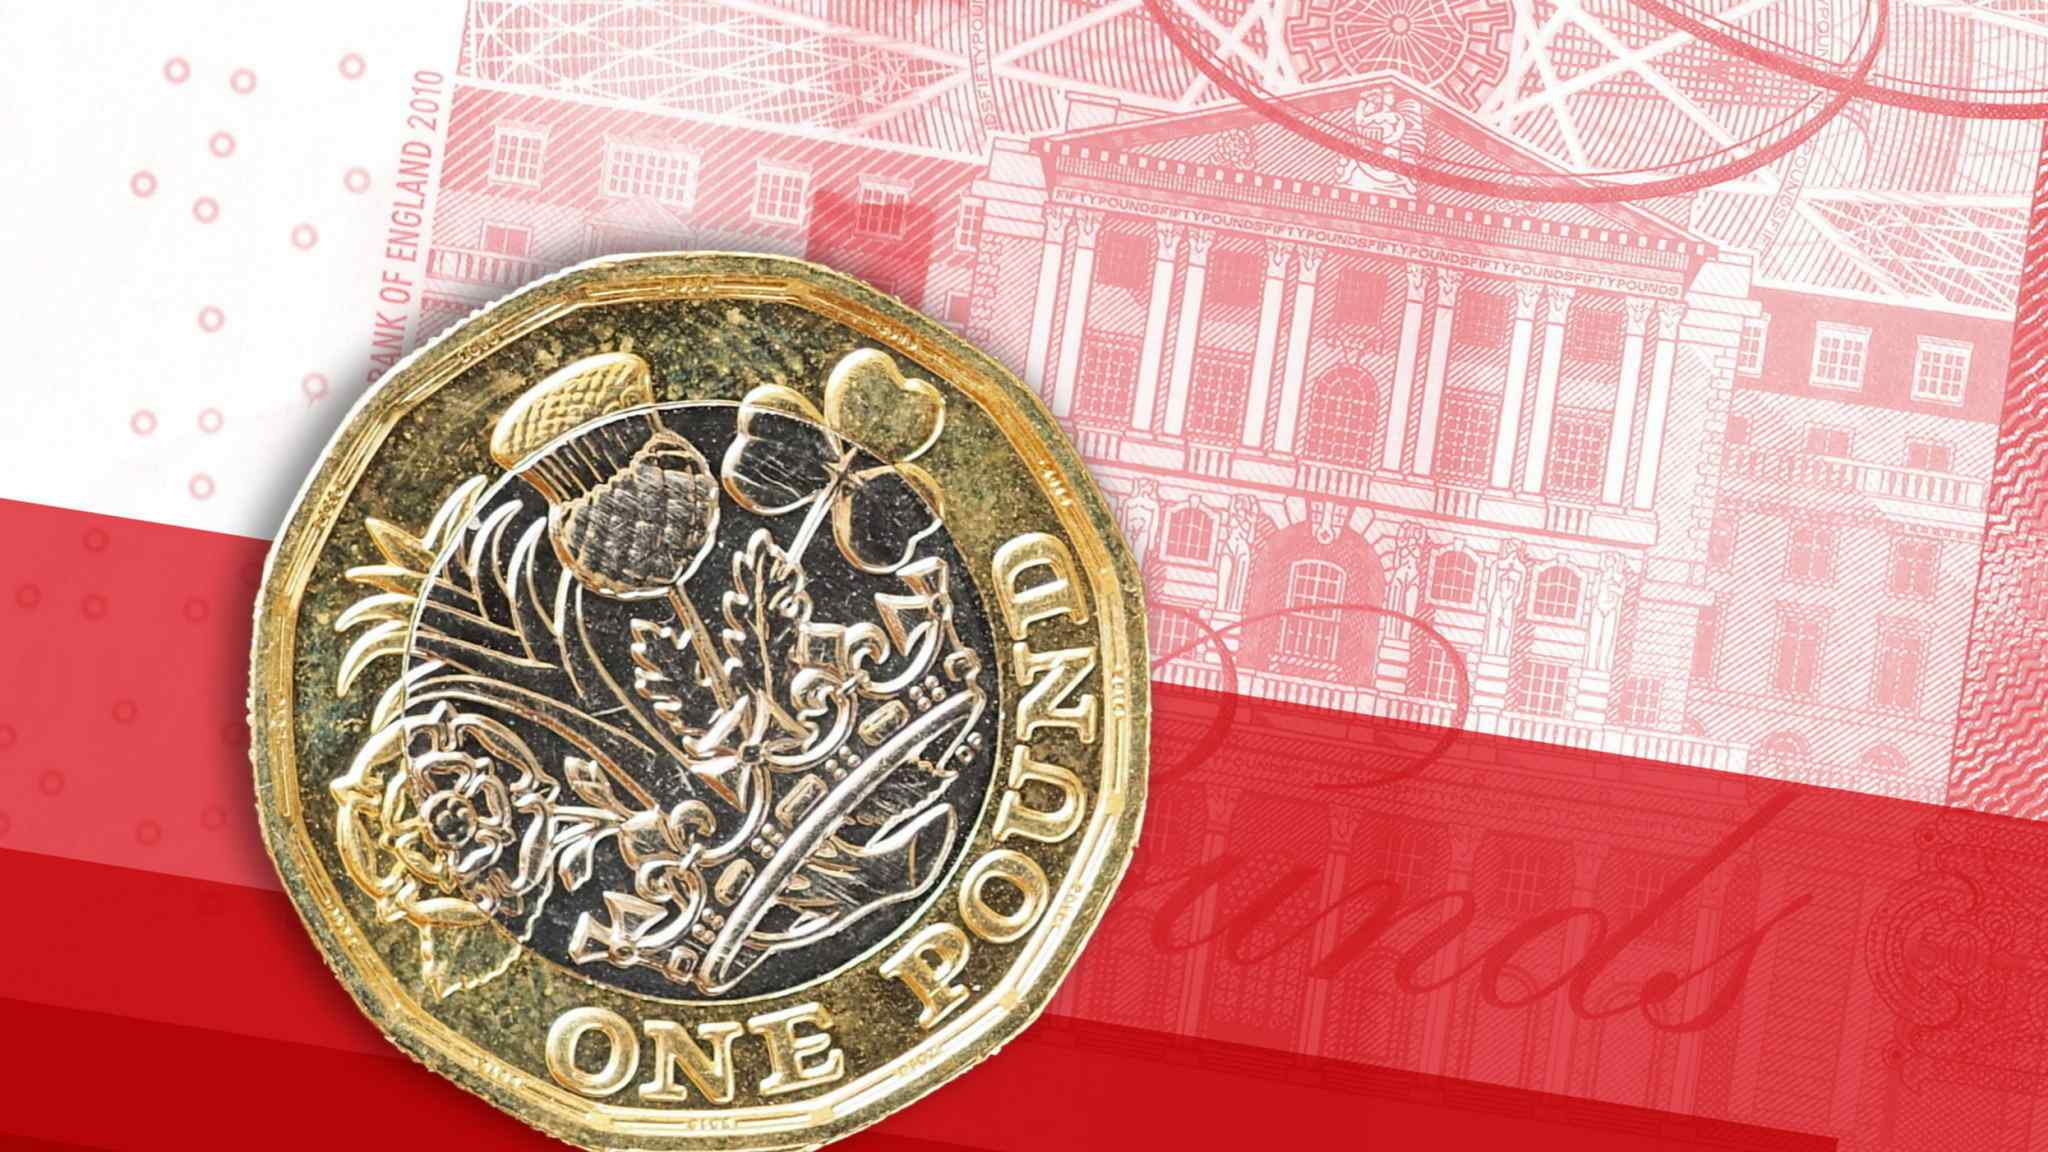 Pound resumes slide after BoE and Treasury seek to steady markets